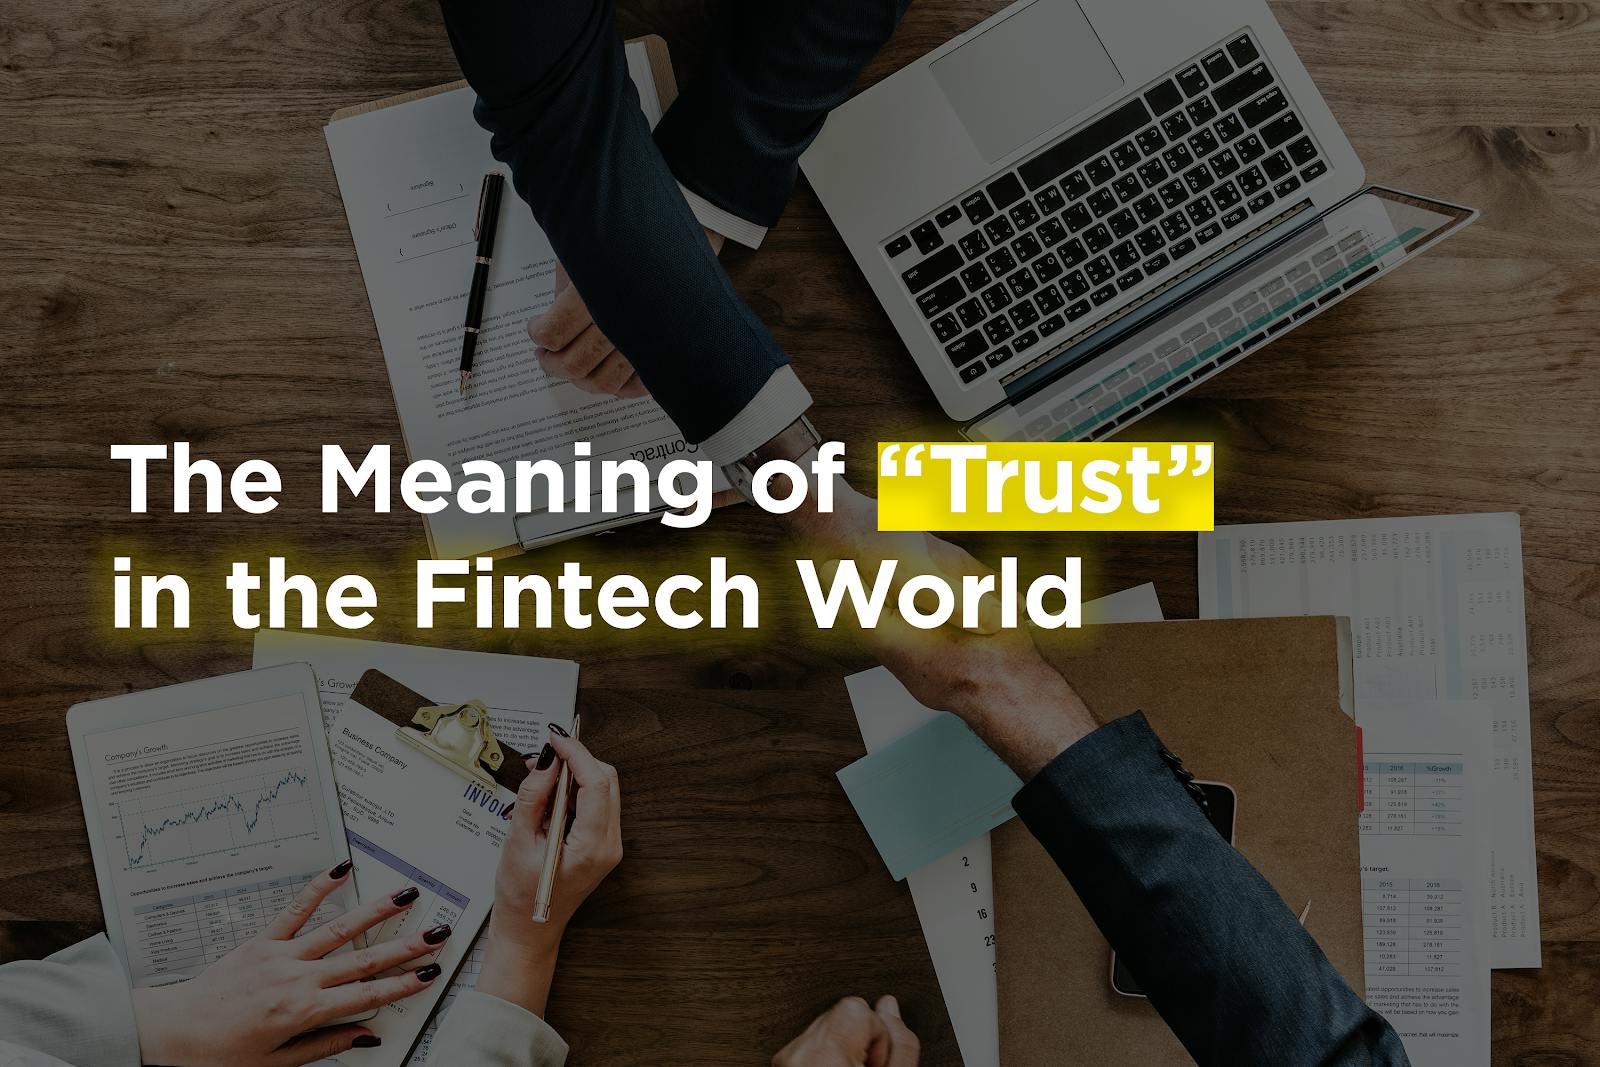 /the-meaning-of-trust-in-the-fintech-world-9bfc2a5ccd6a feature image